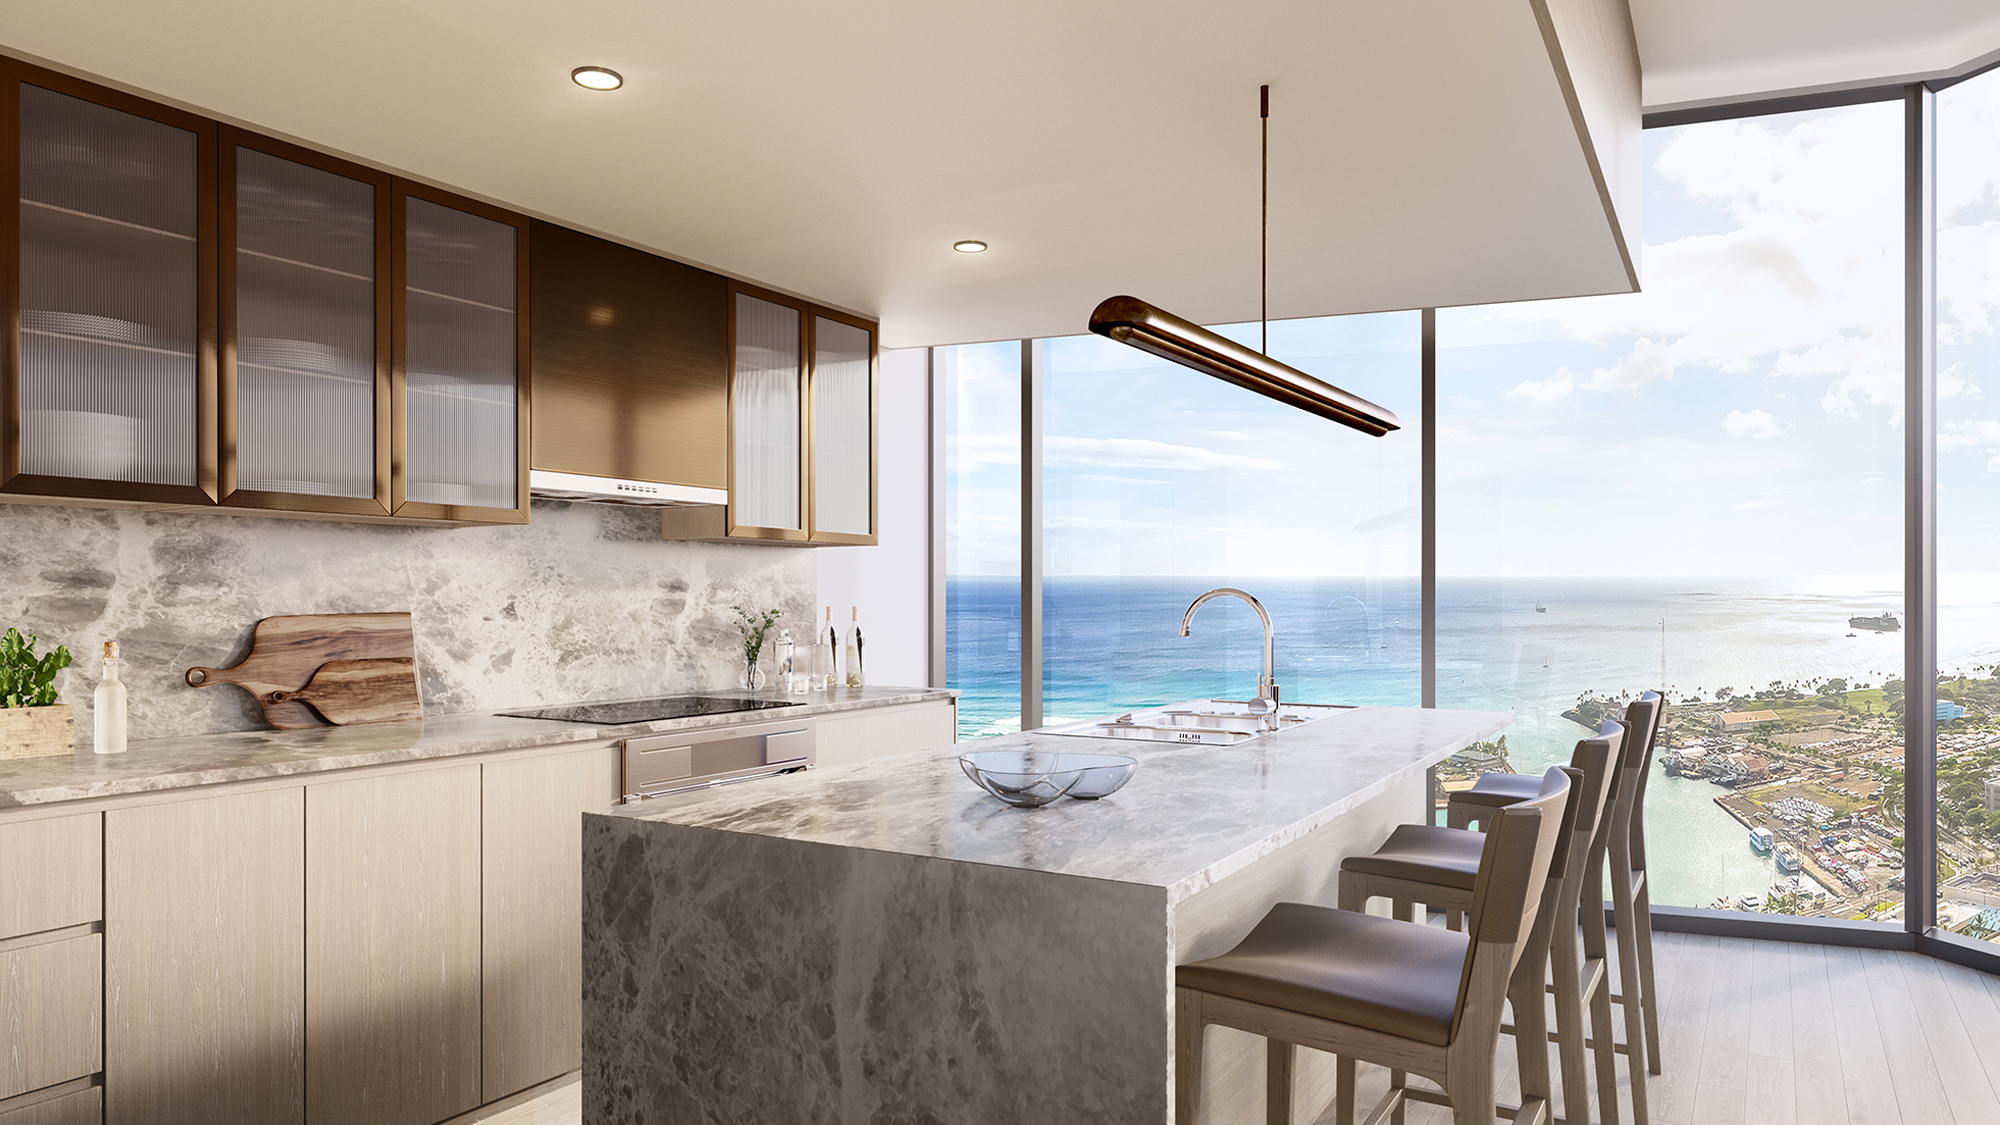 Residence 3A Kitchen overlooking the Pacific Ocean